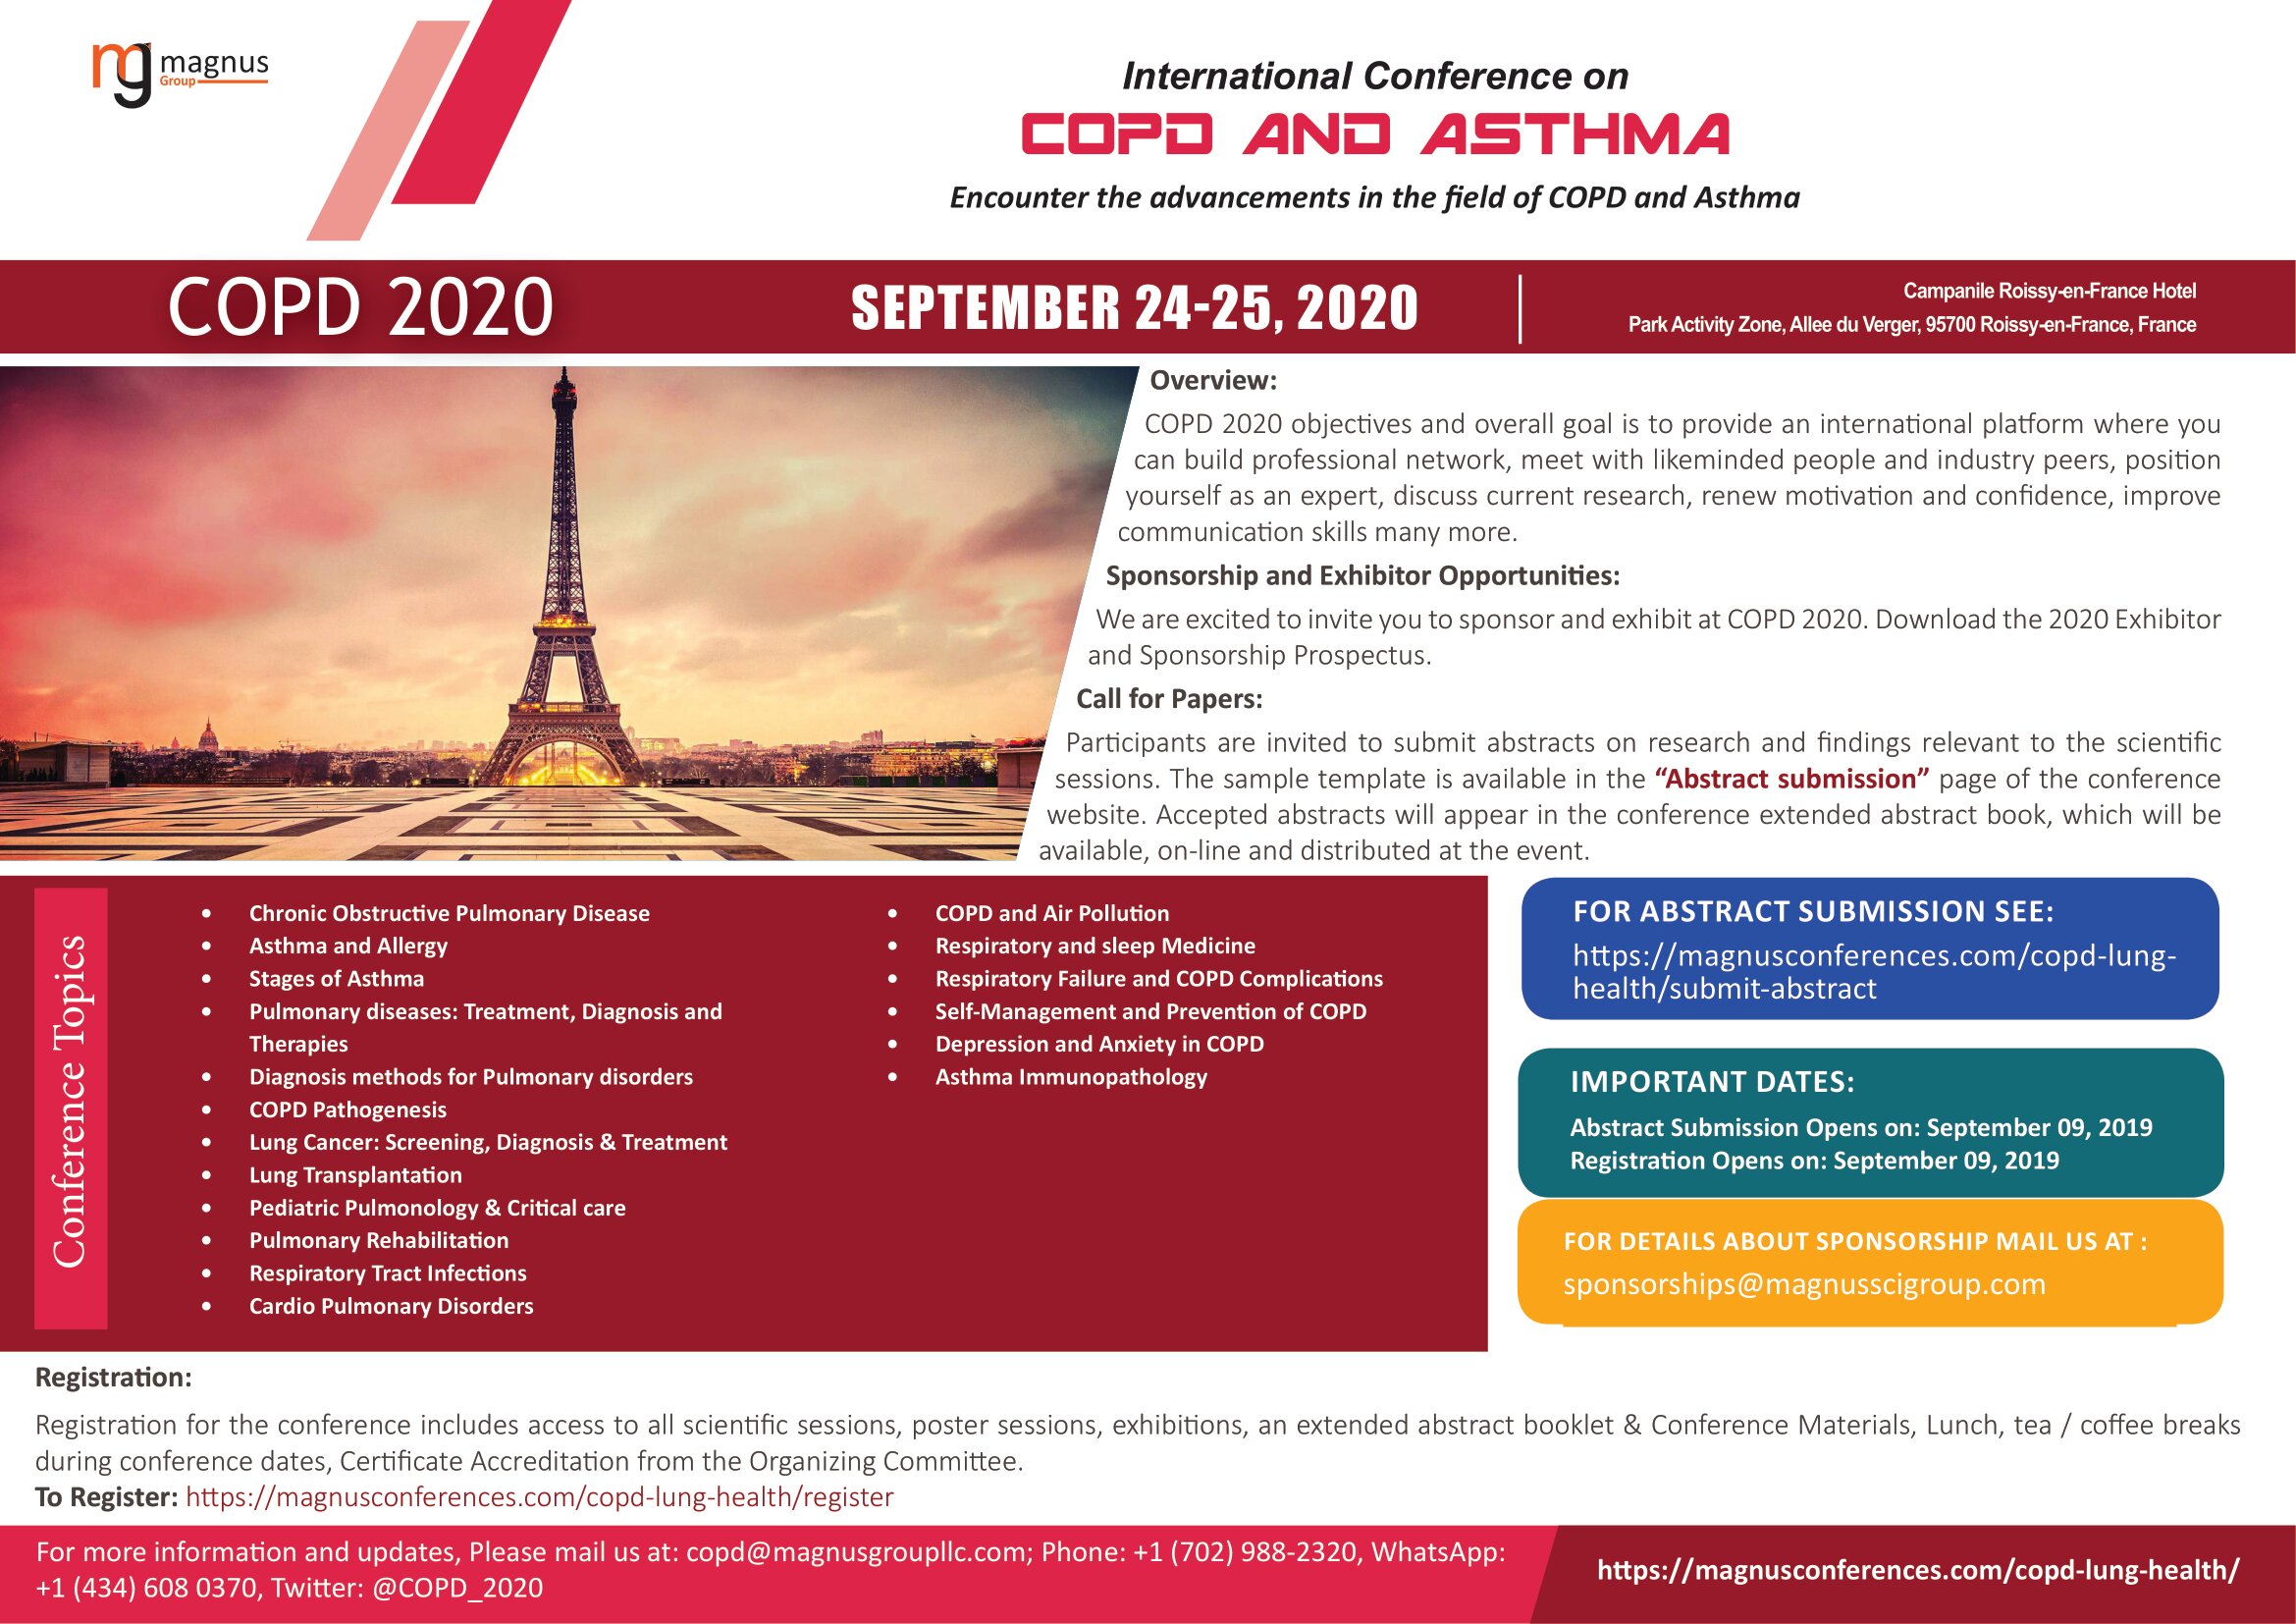 International conference on COPD and Asthma, Paris, France